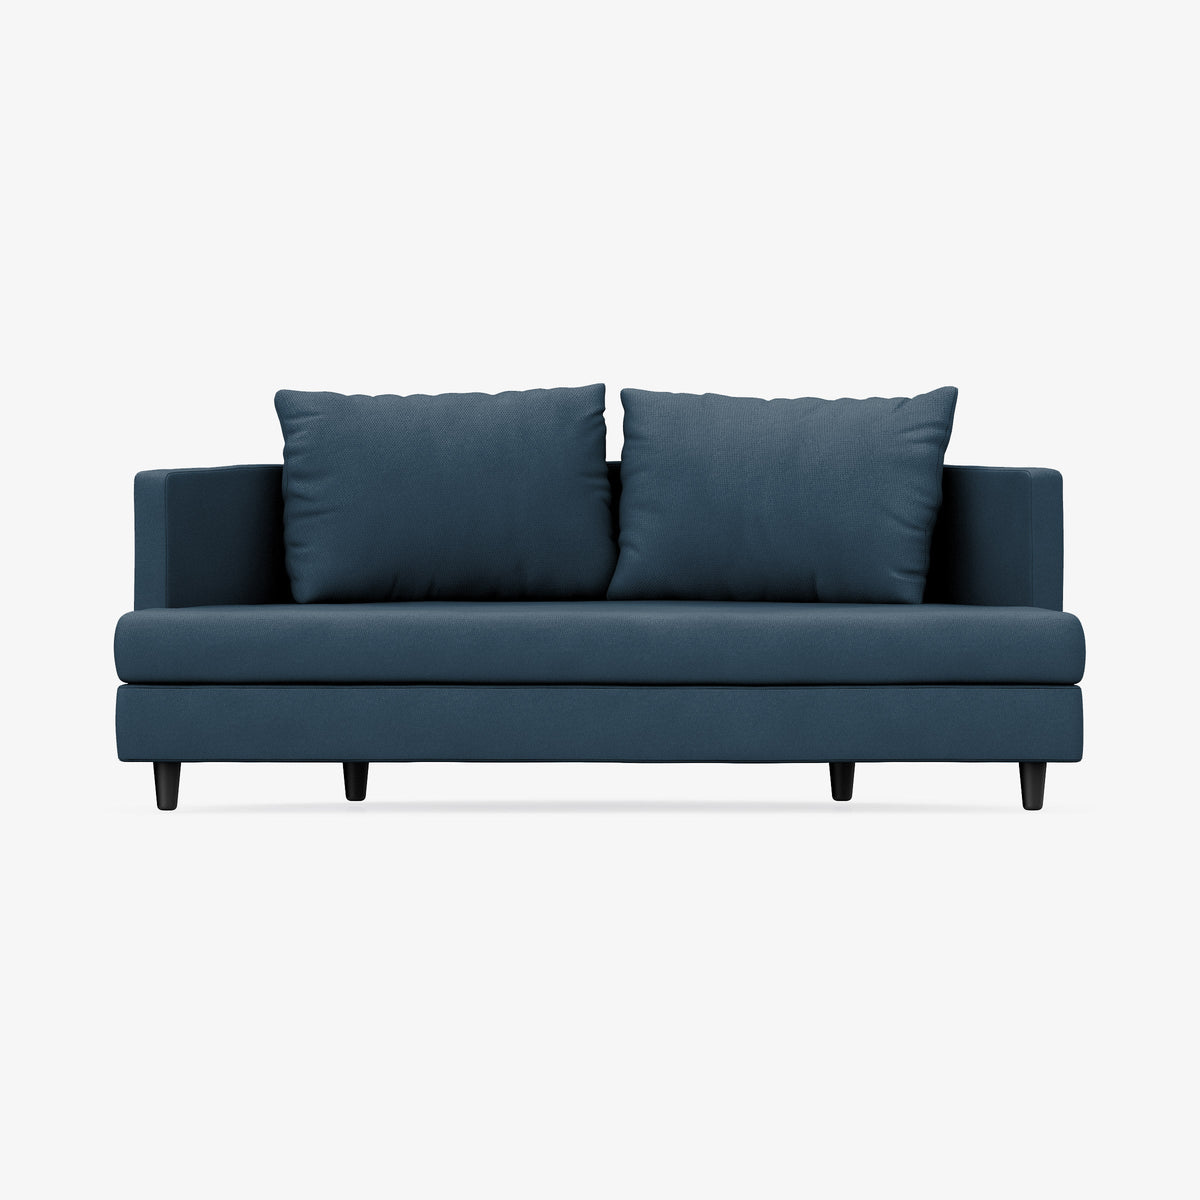 Cosmopolitan Comfort: Couture Couch